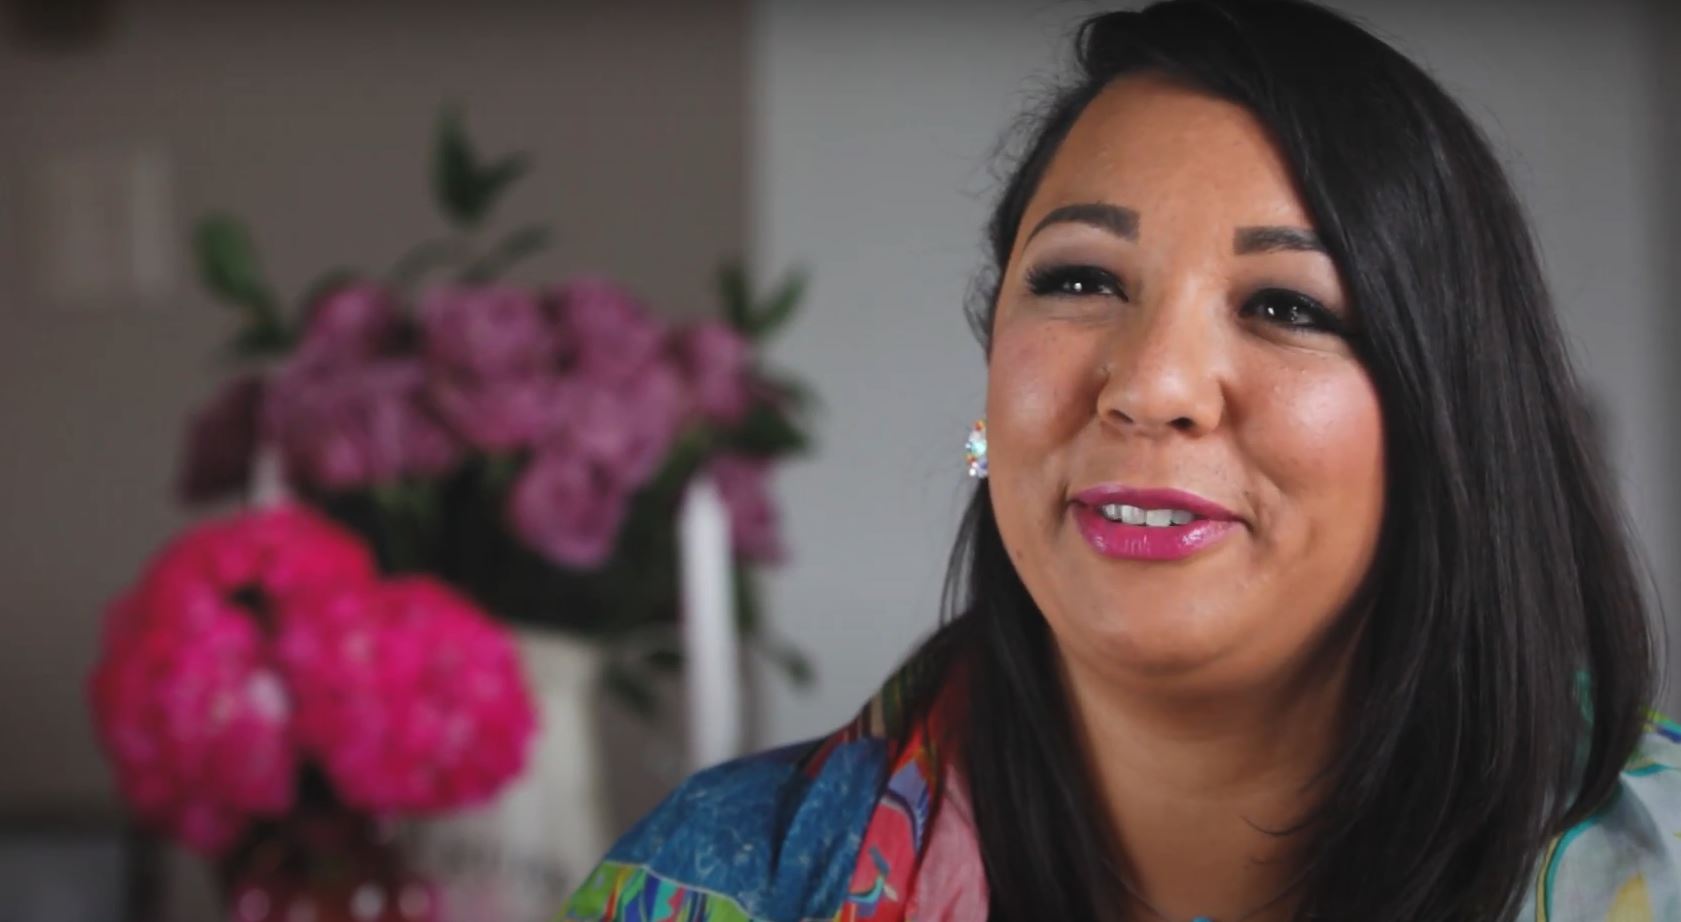 A two-spirit journey: finding identity through Indigenous culture